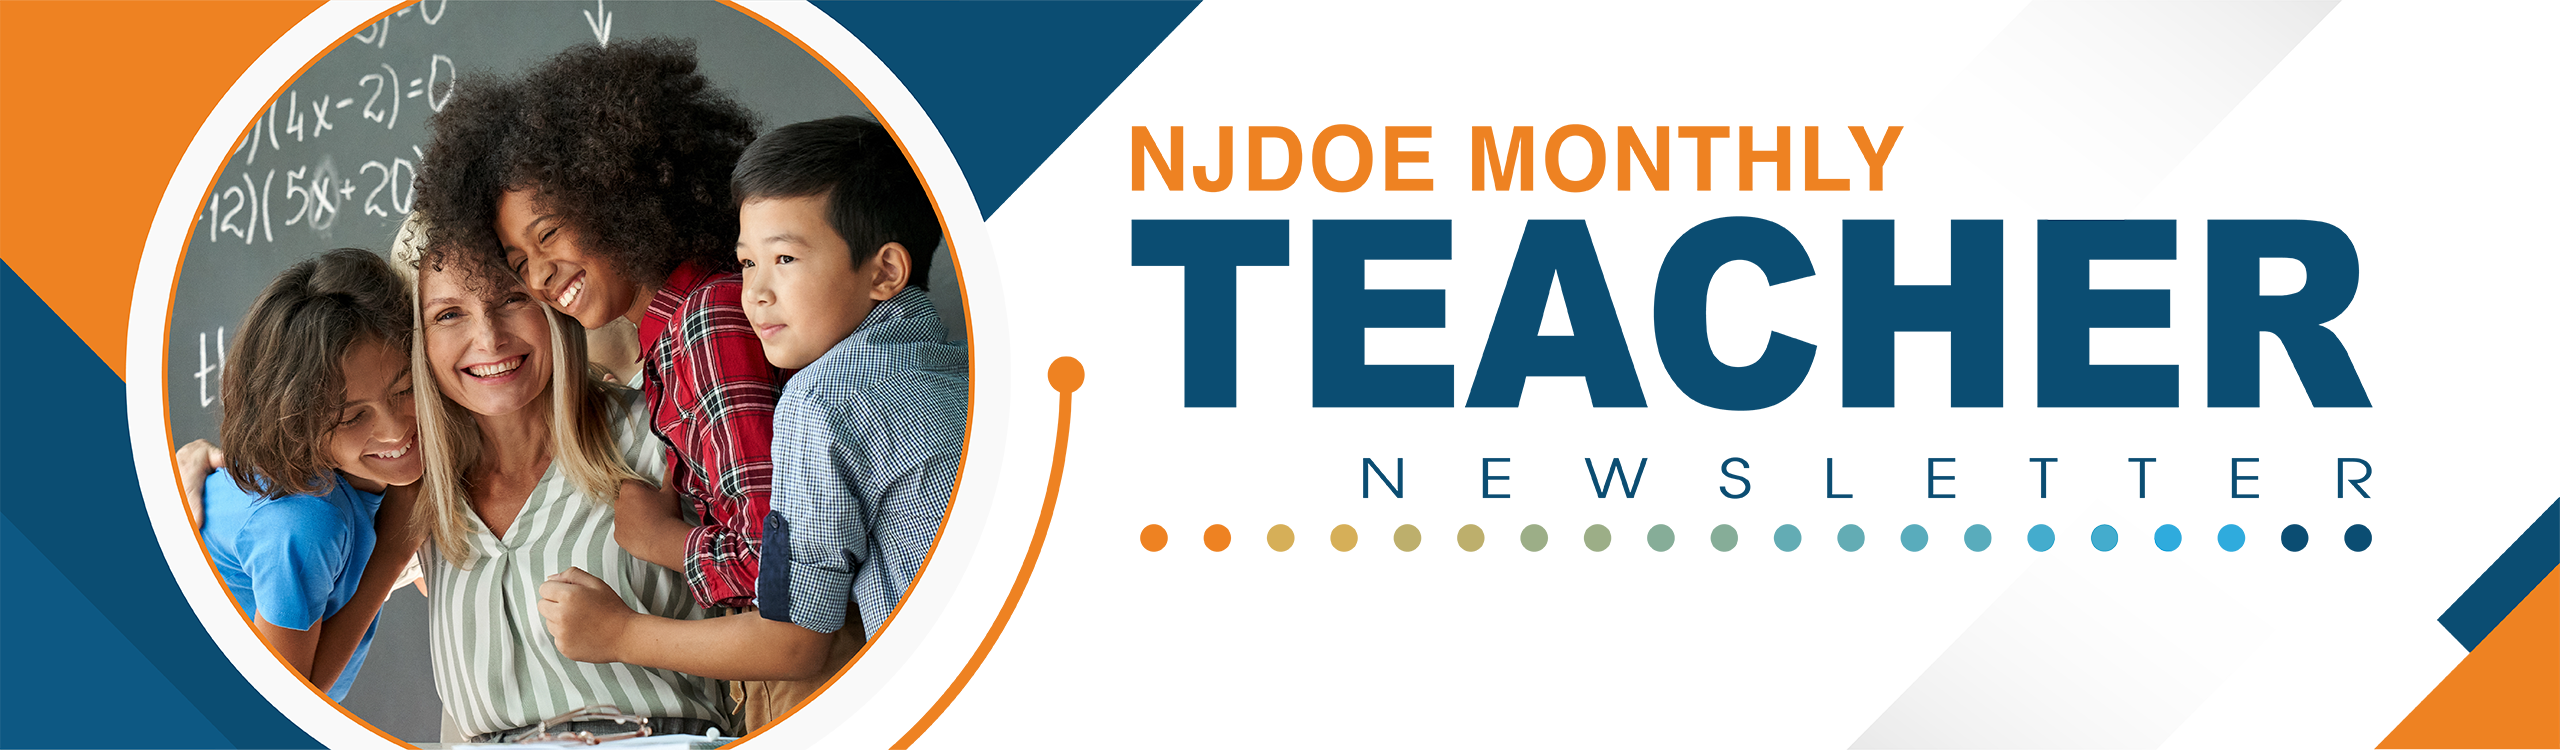 NJDOE Monthly Teacher Newsletter. Photo of smiling, female teacher with her arms around three smiling kids in front of a chalkboard.